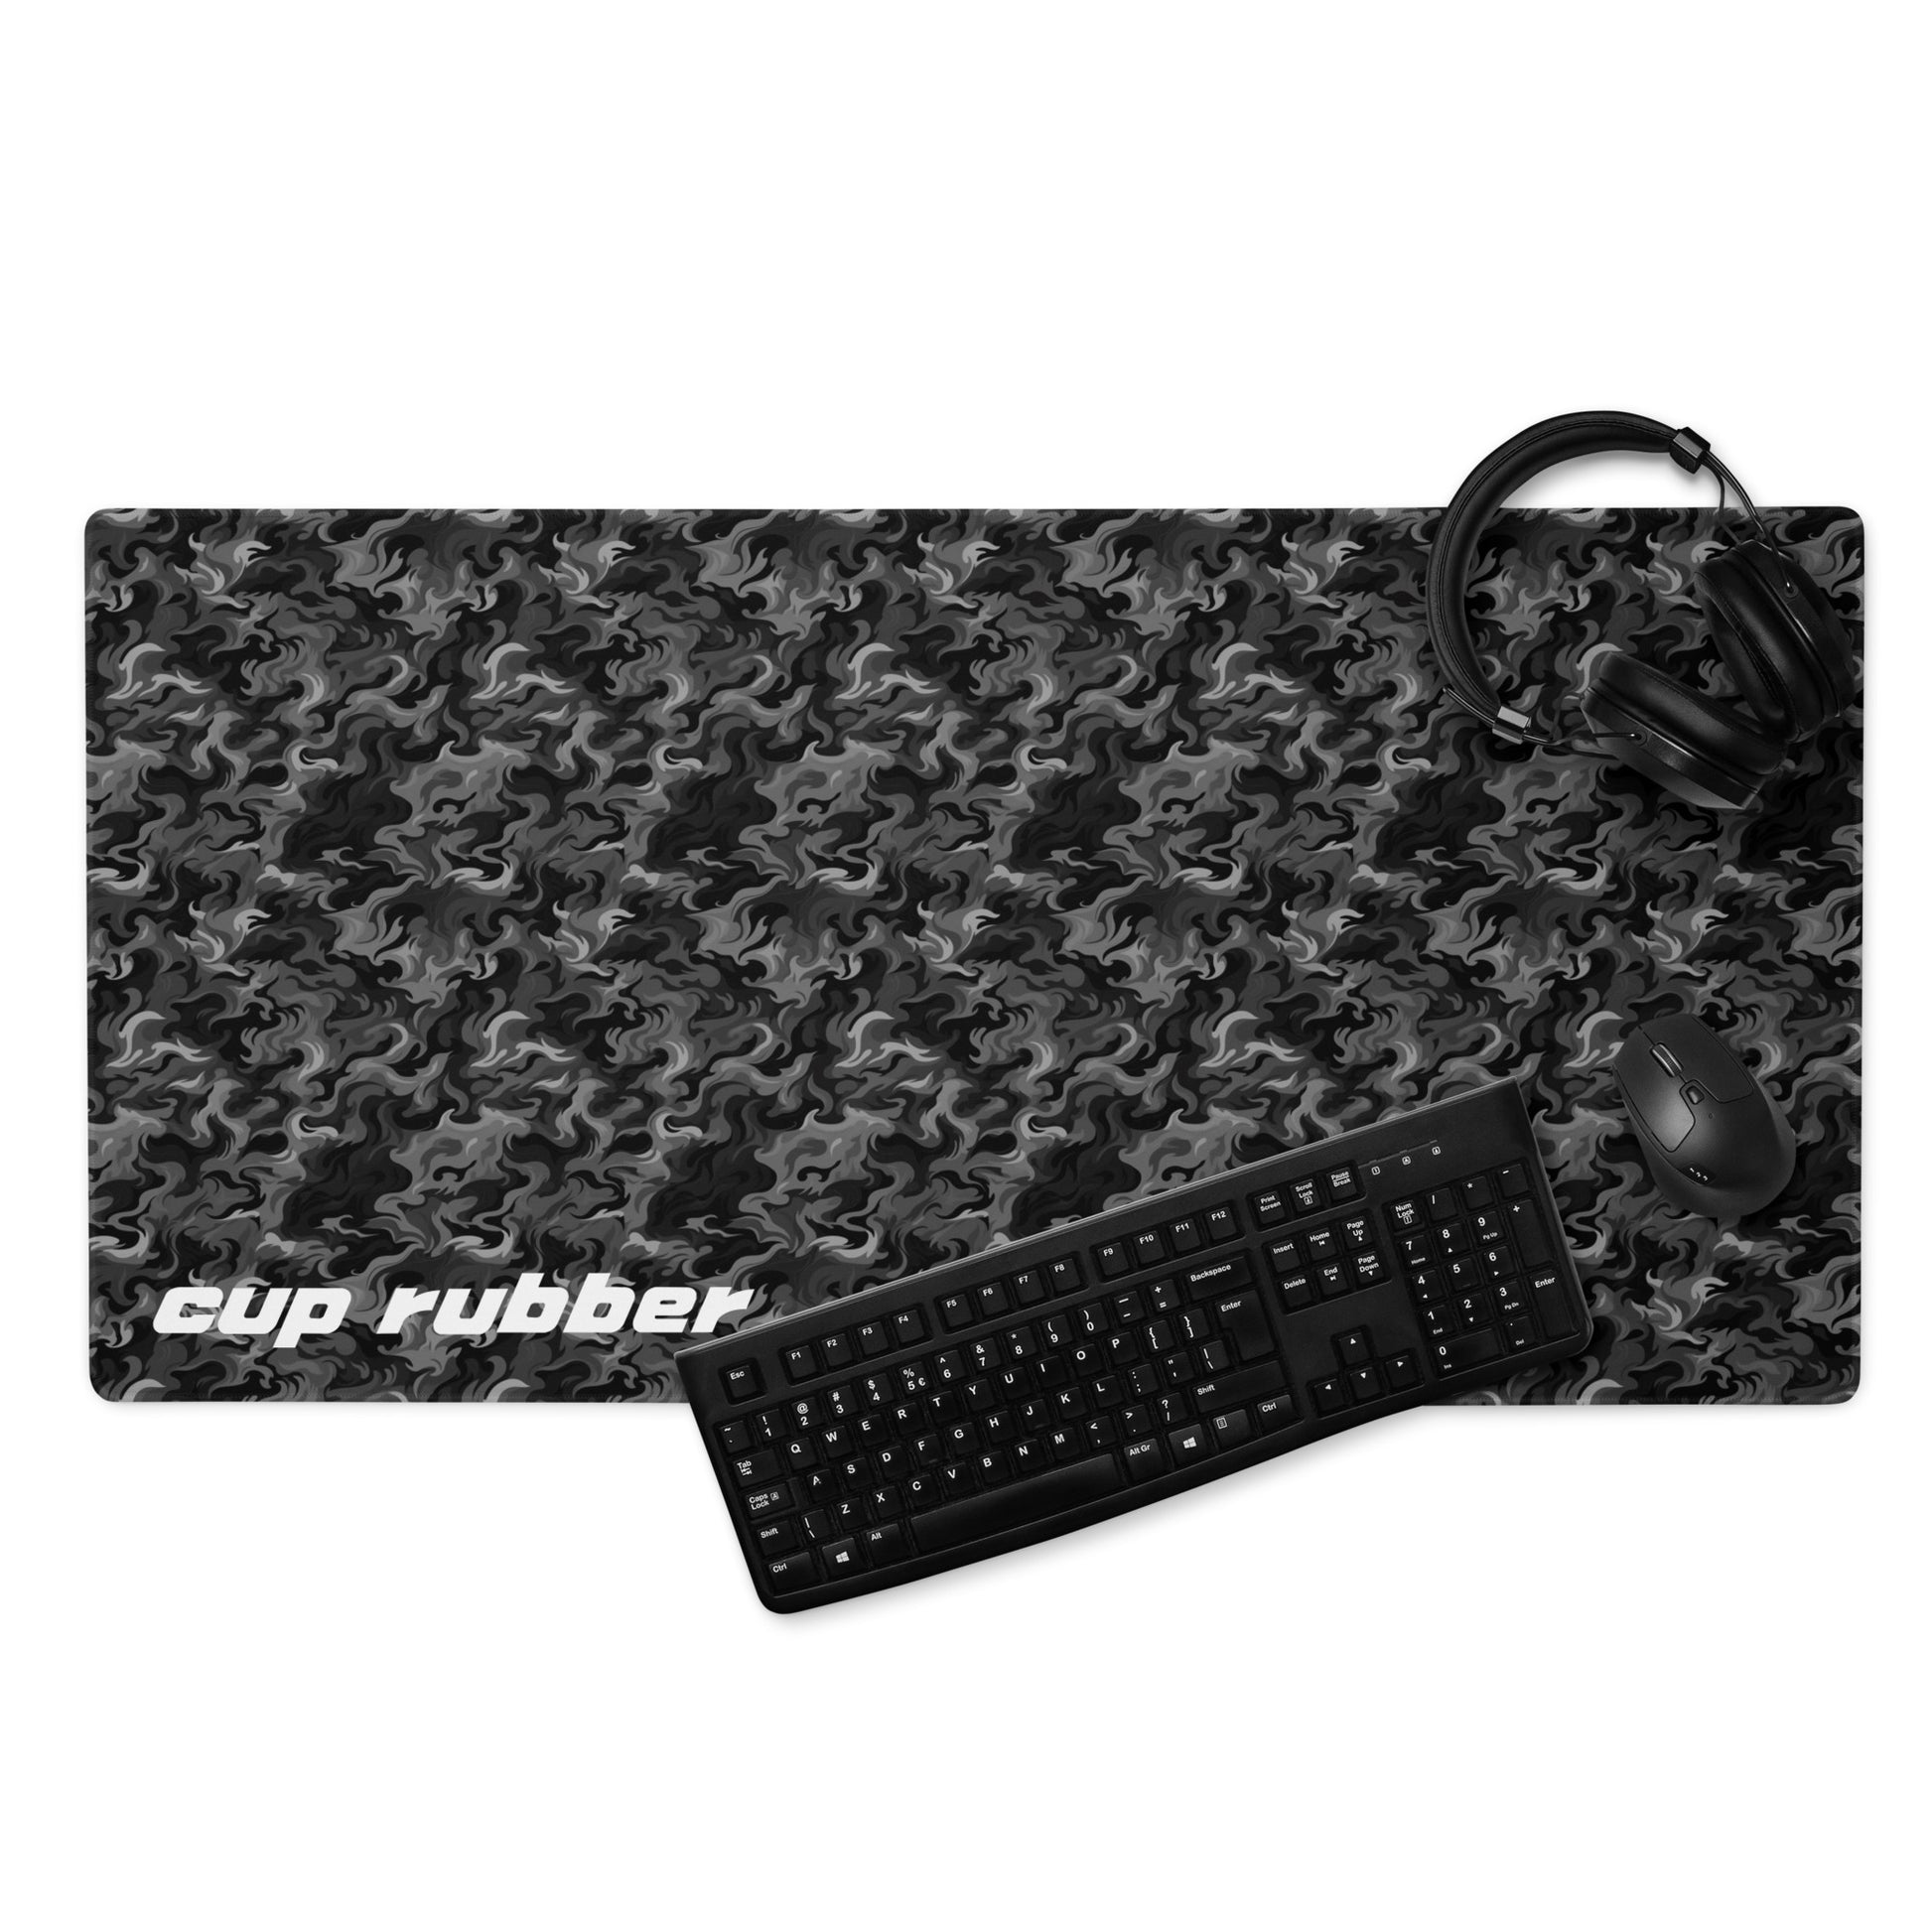 A 36" x 18" desk pad with a camo pattern all over it and the word "Cup Rubber" in the bottom left corner displayed with a keyboard, headphones and a mouse. Black and Charcoal in color.